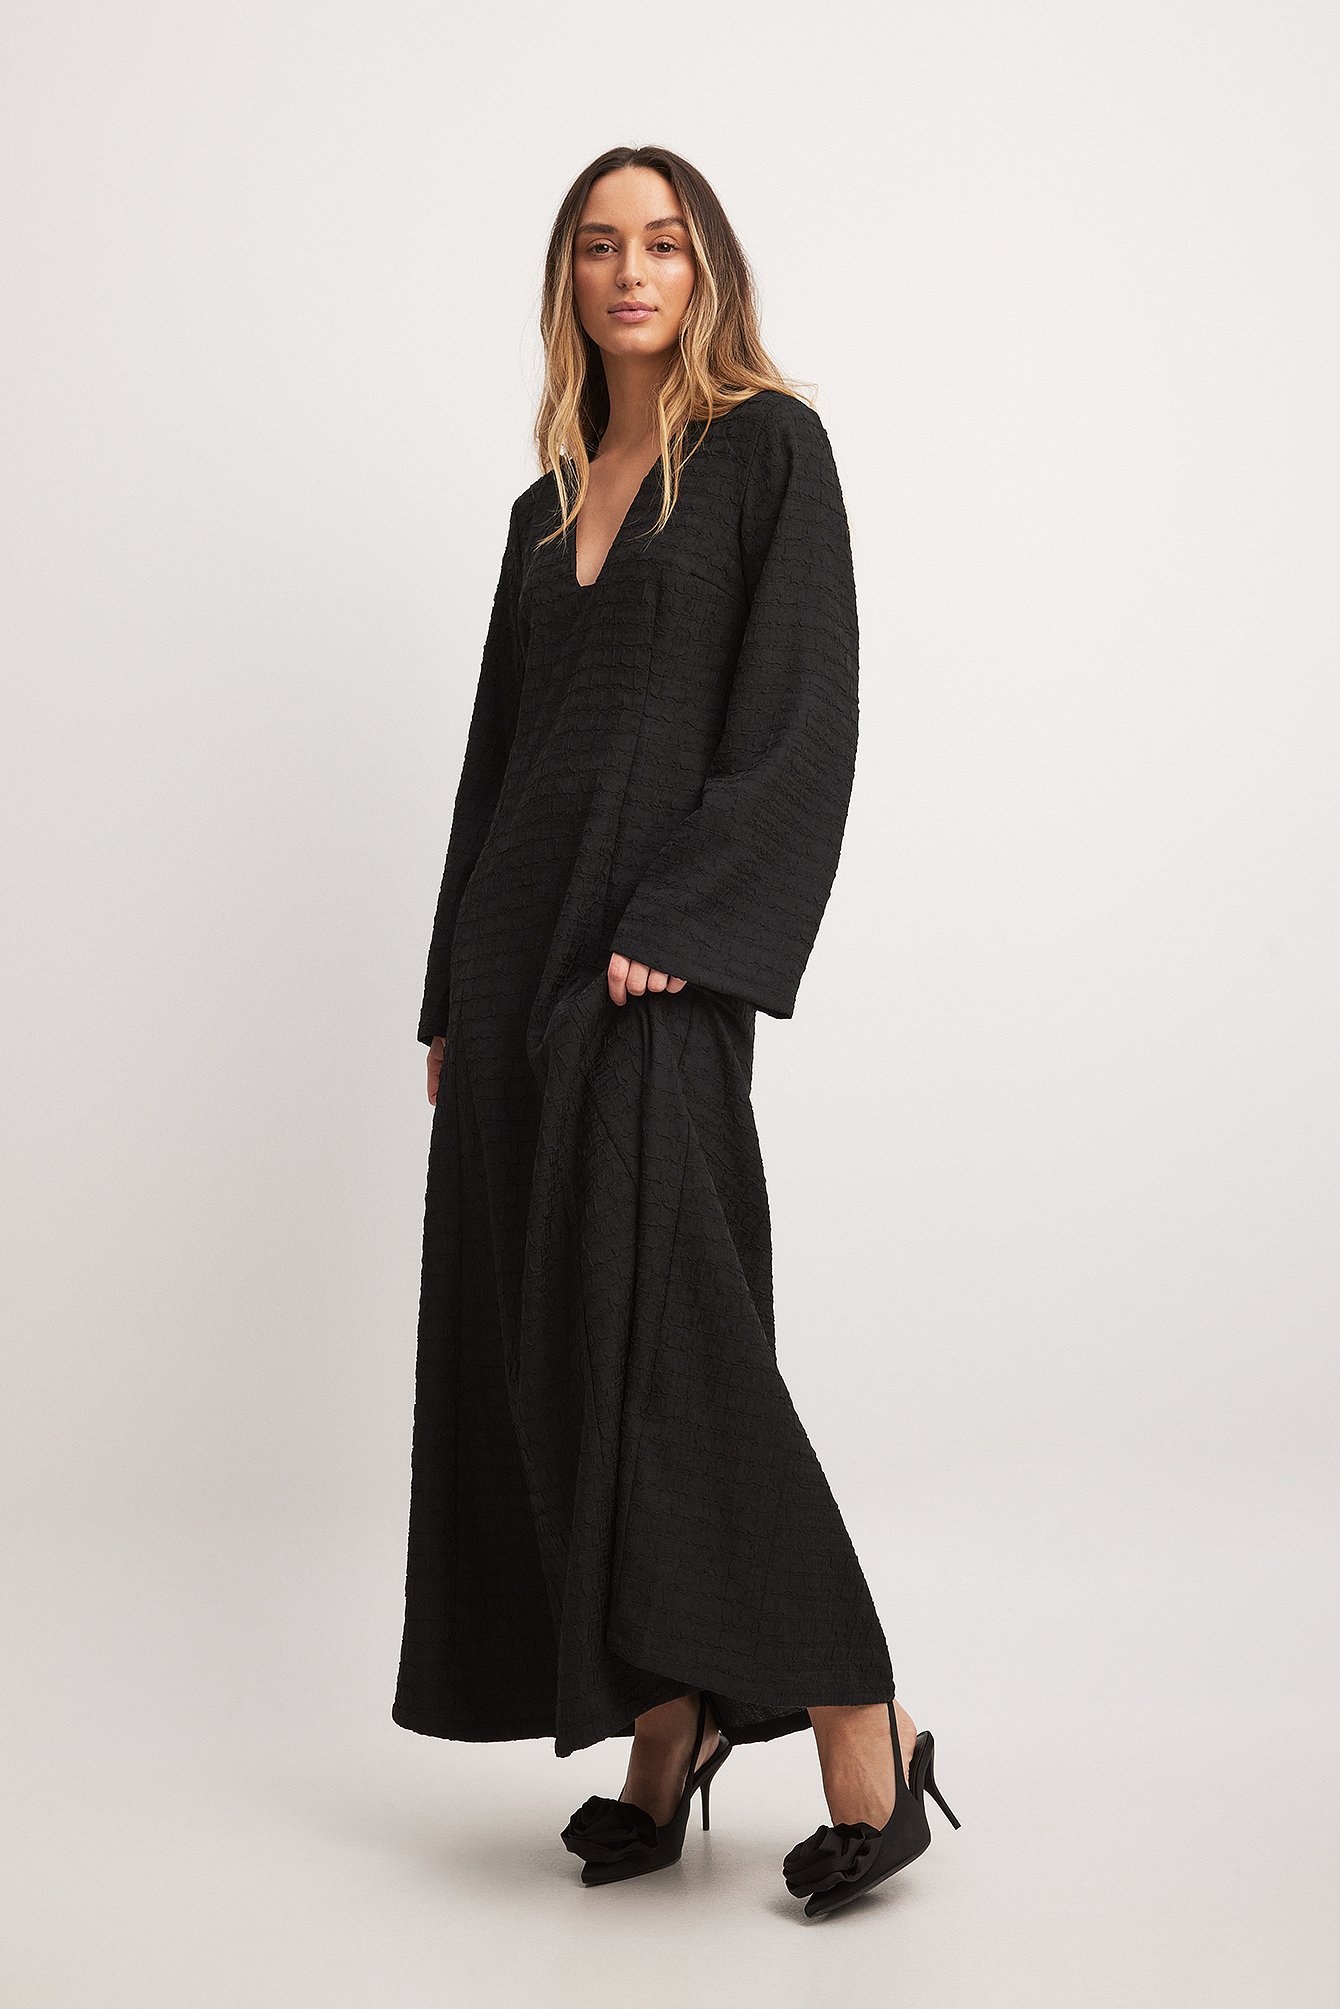 31 Winter Maxi Dress You Can Score on Sale Right Now